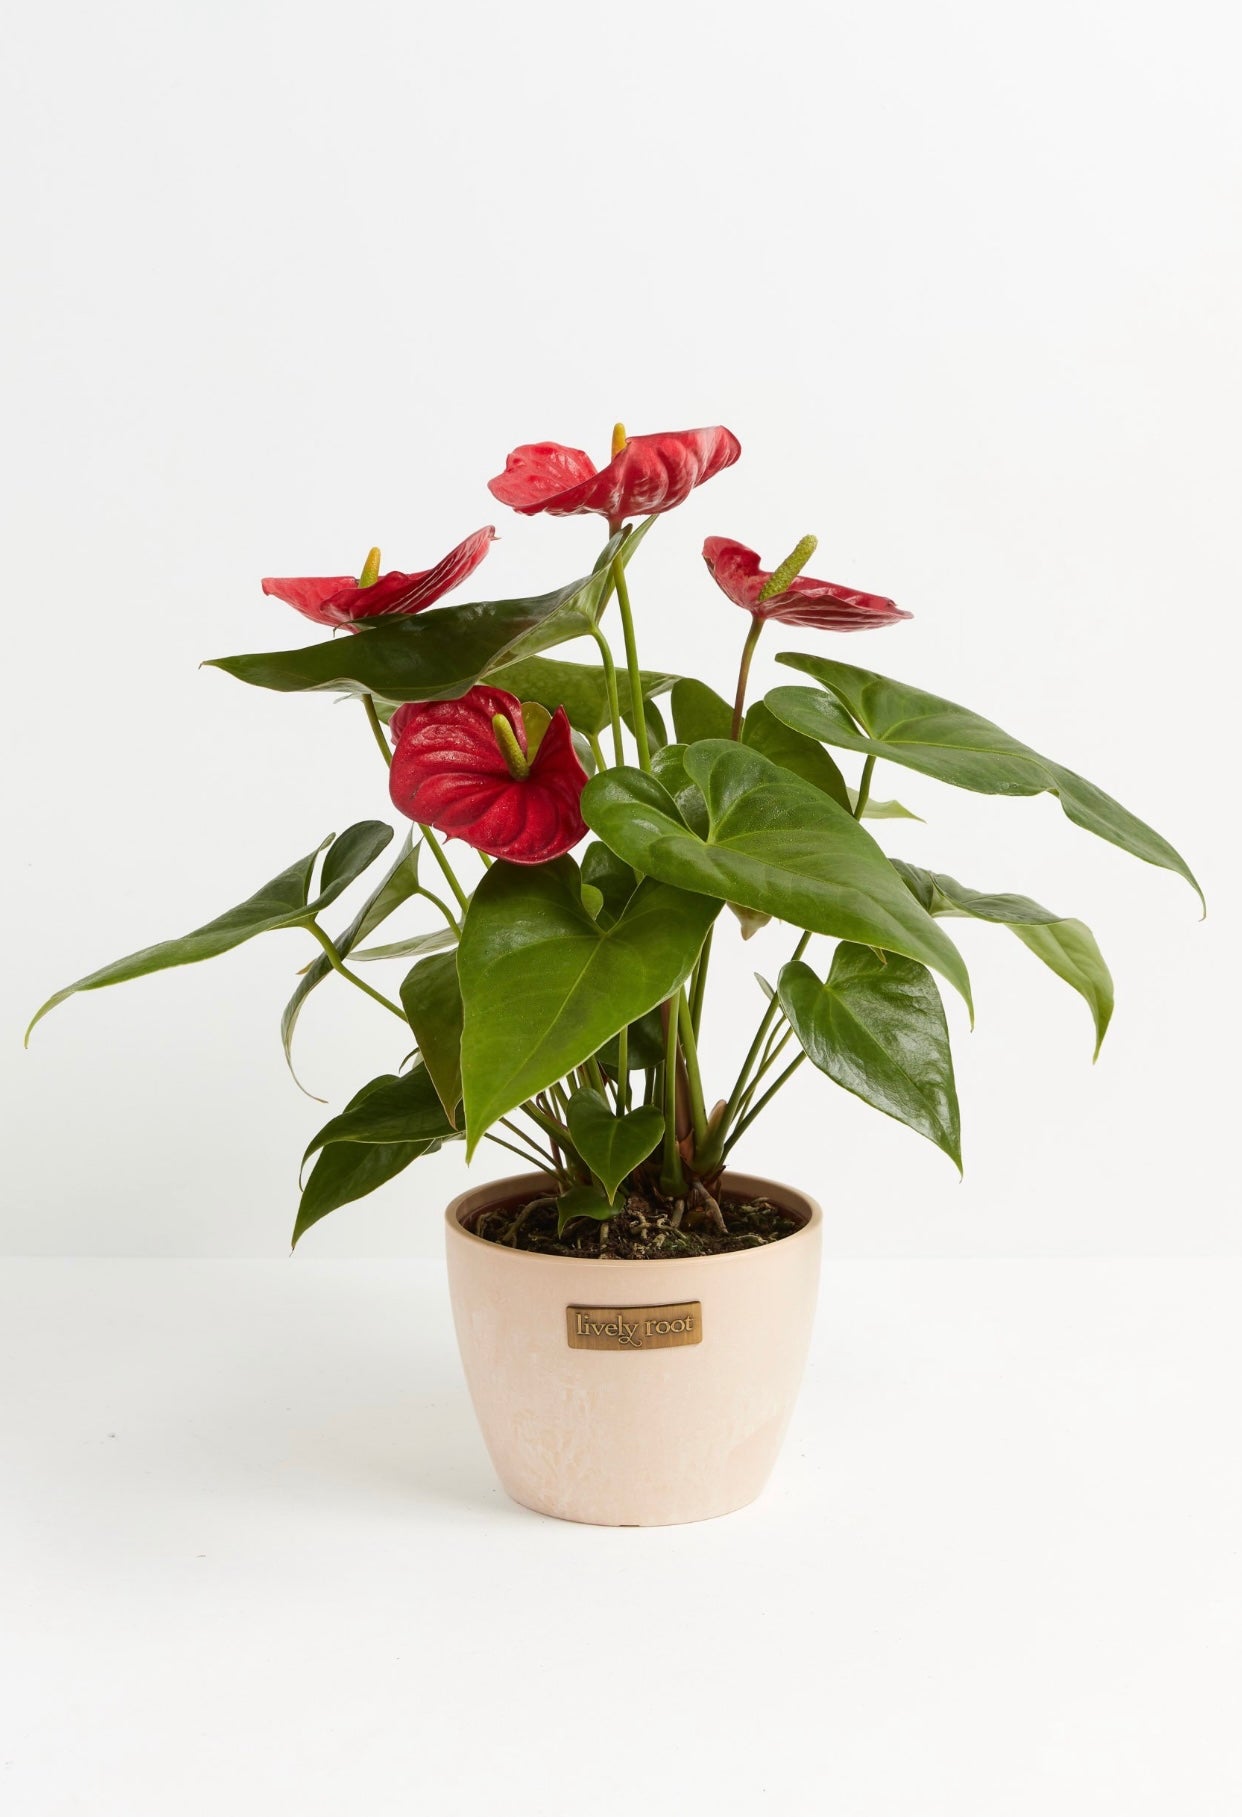 How to Grow and Care for your Flamingo Flower | Lively Root